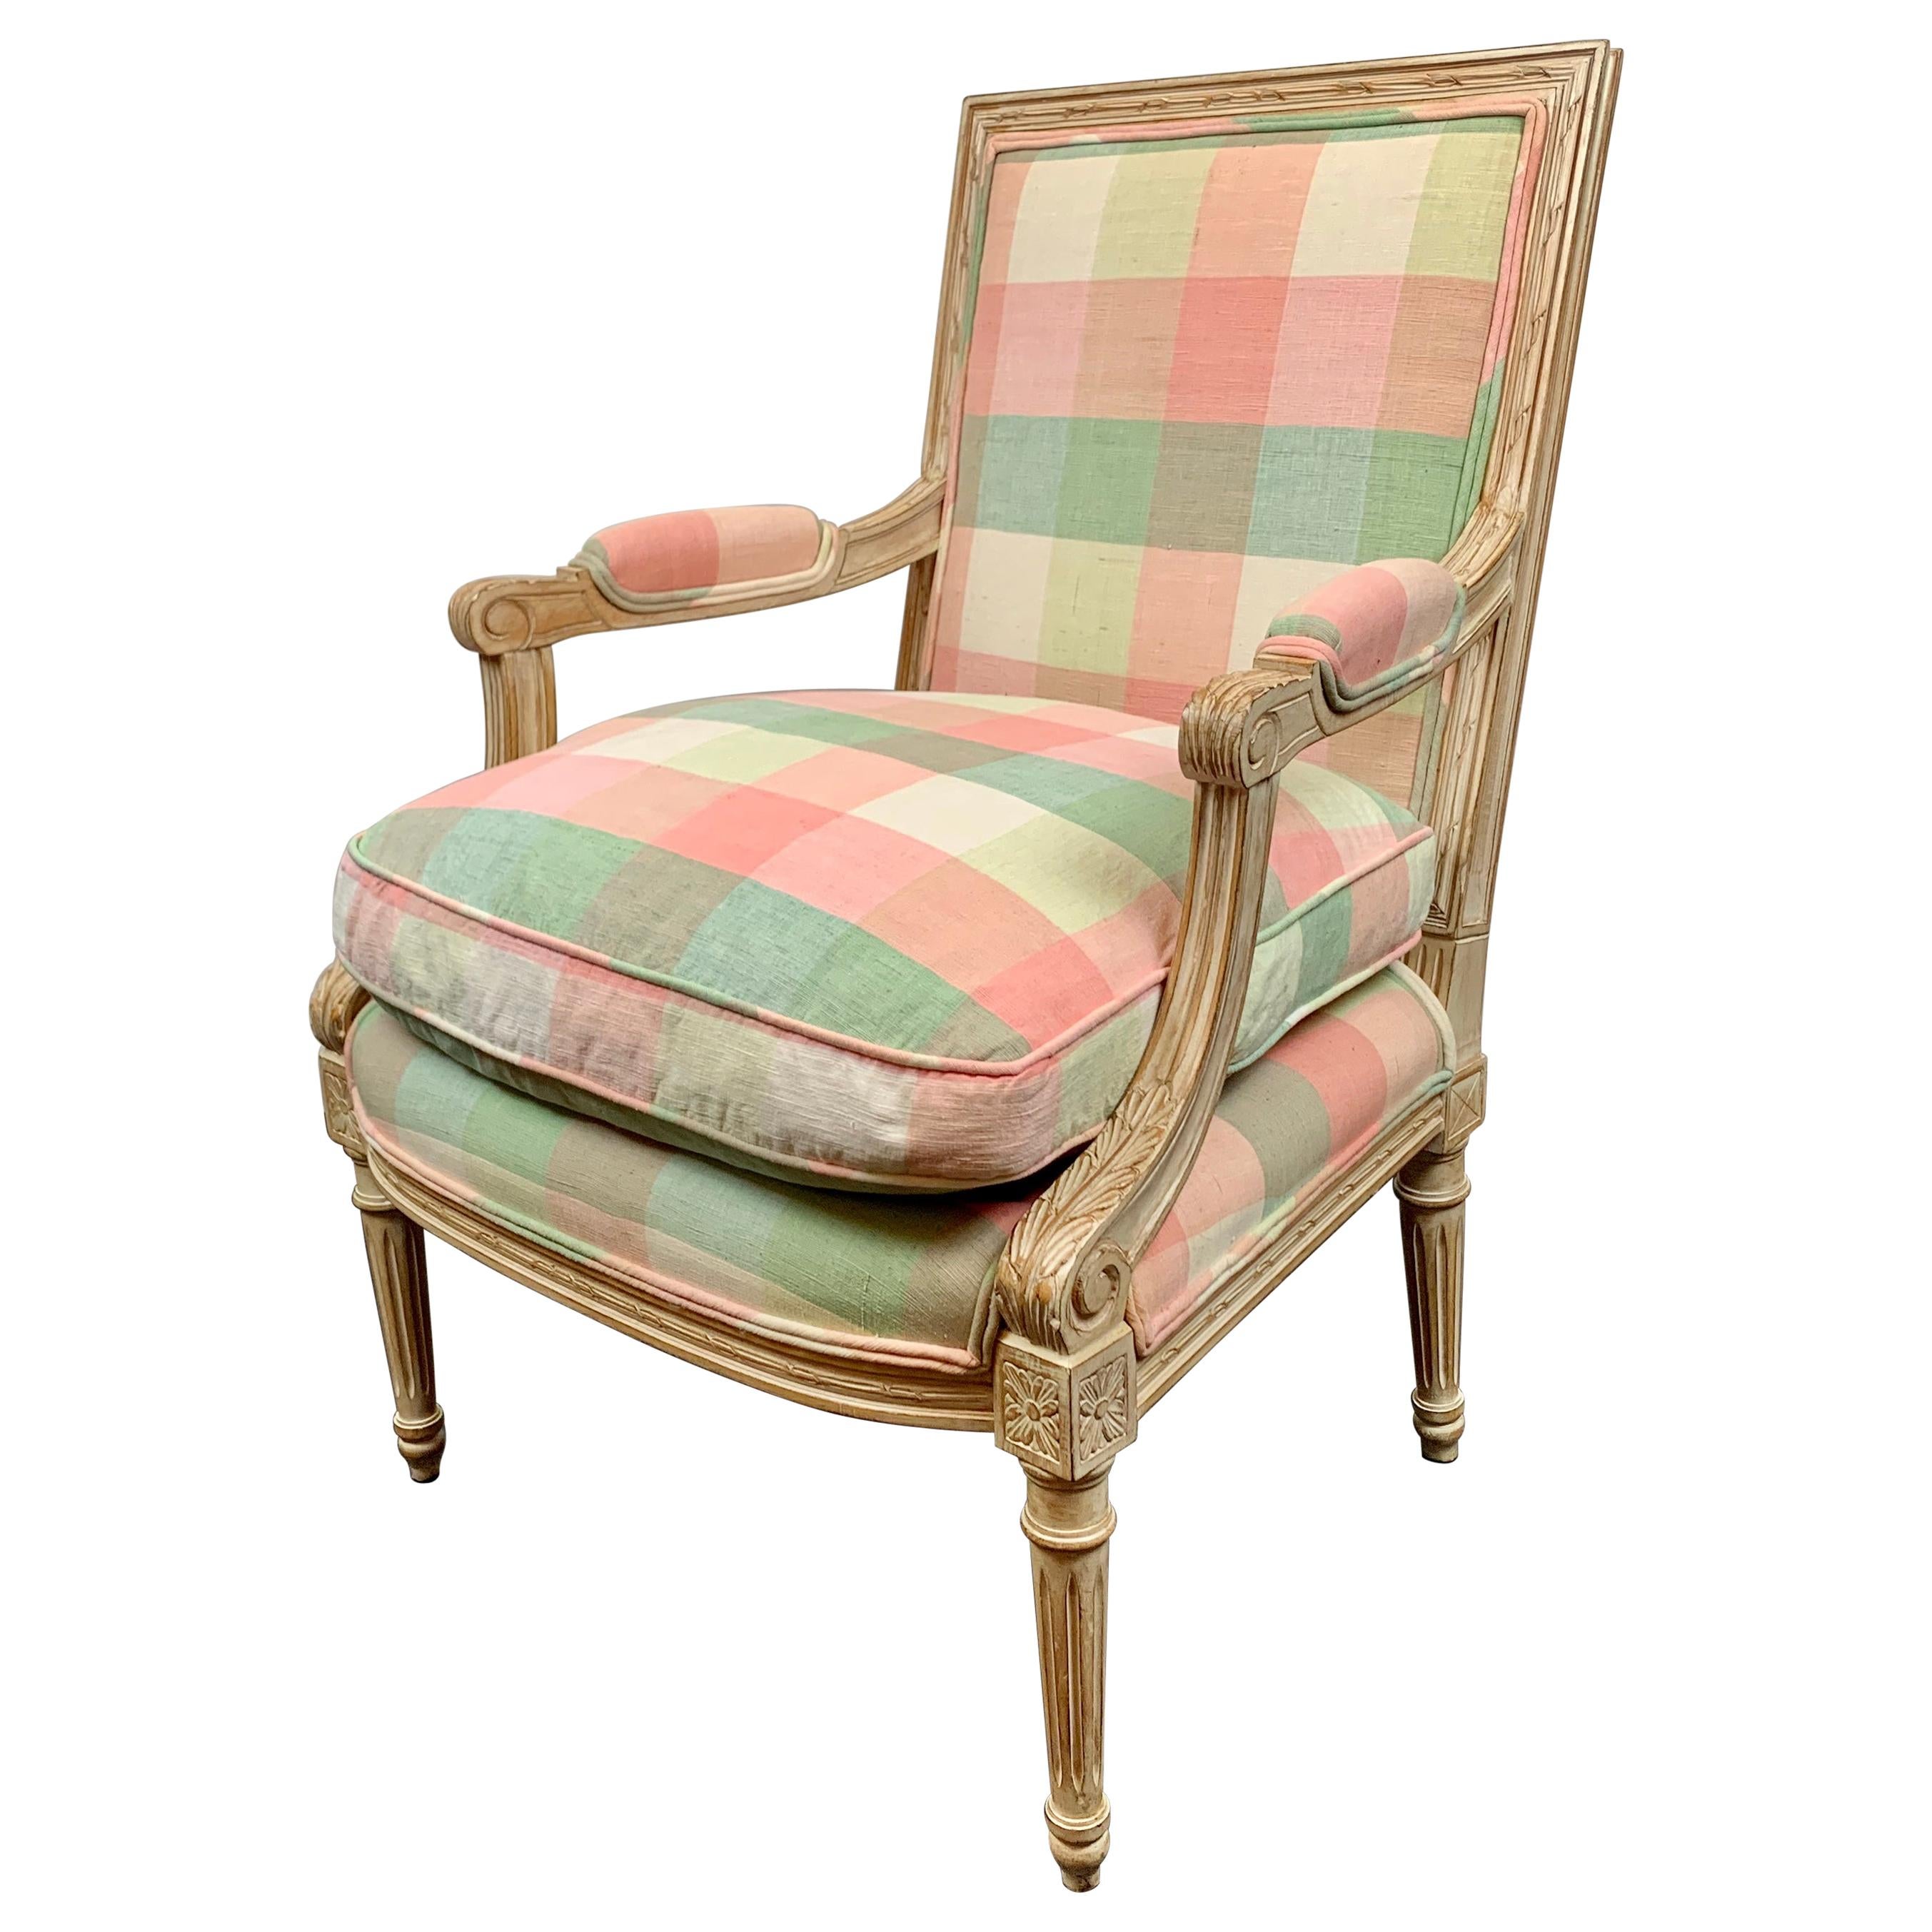 Meyer, Gunther & Martini's Louis XVI Style Fauteuil